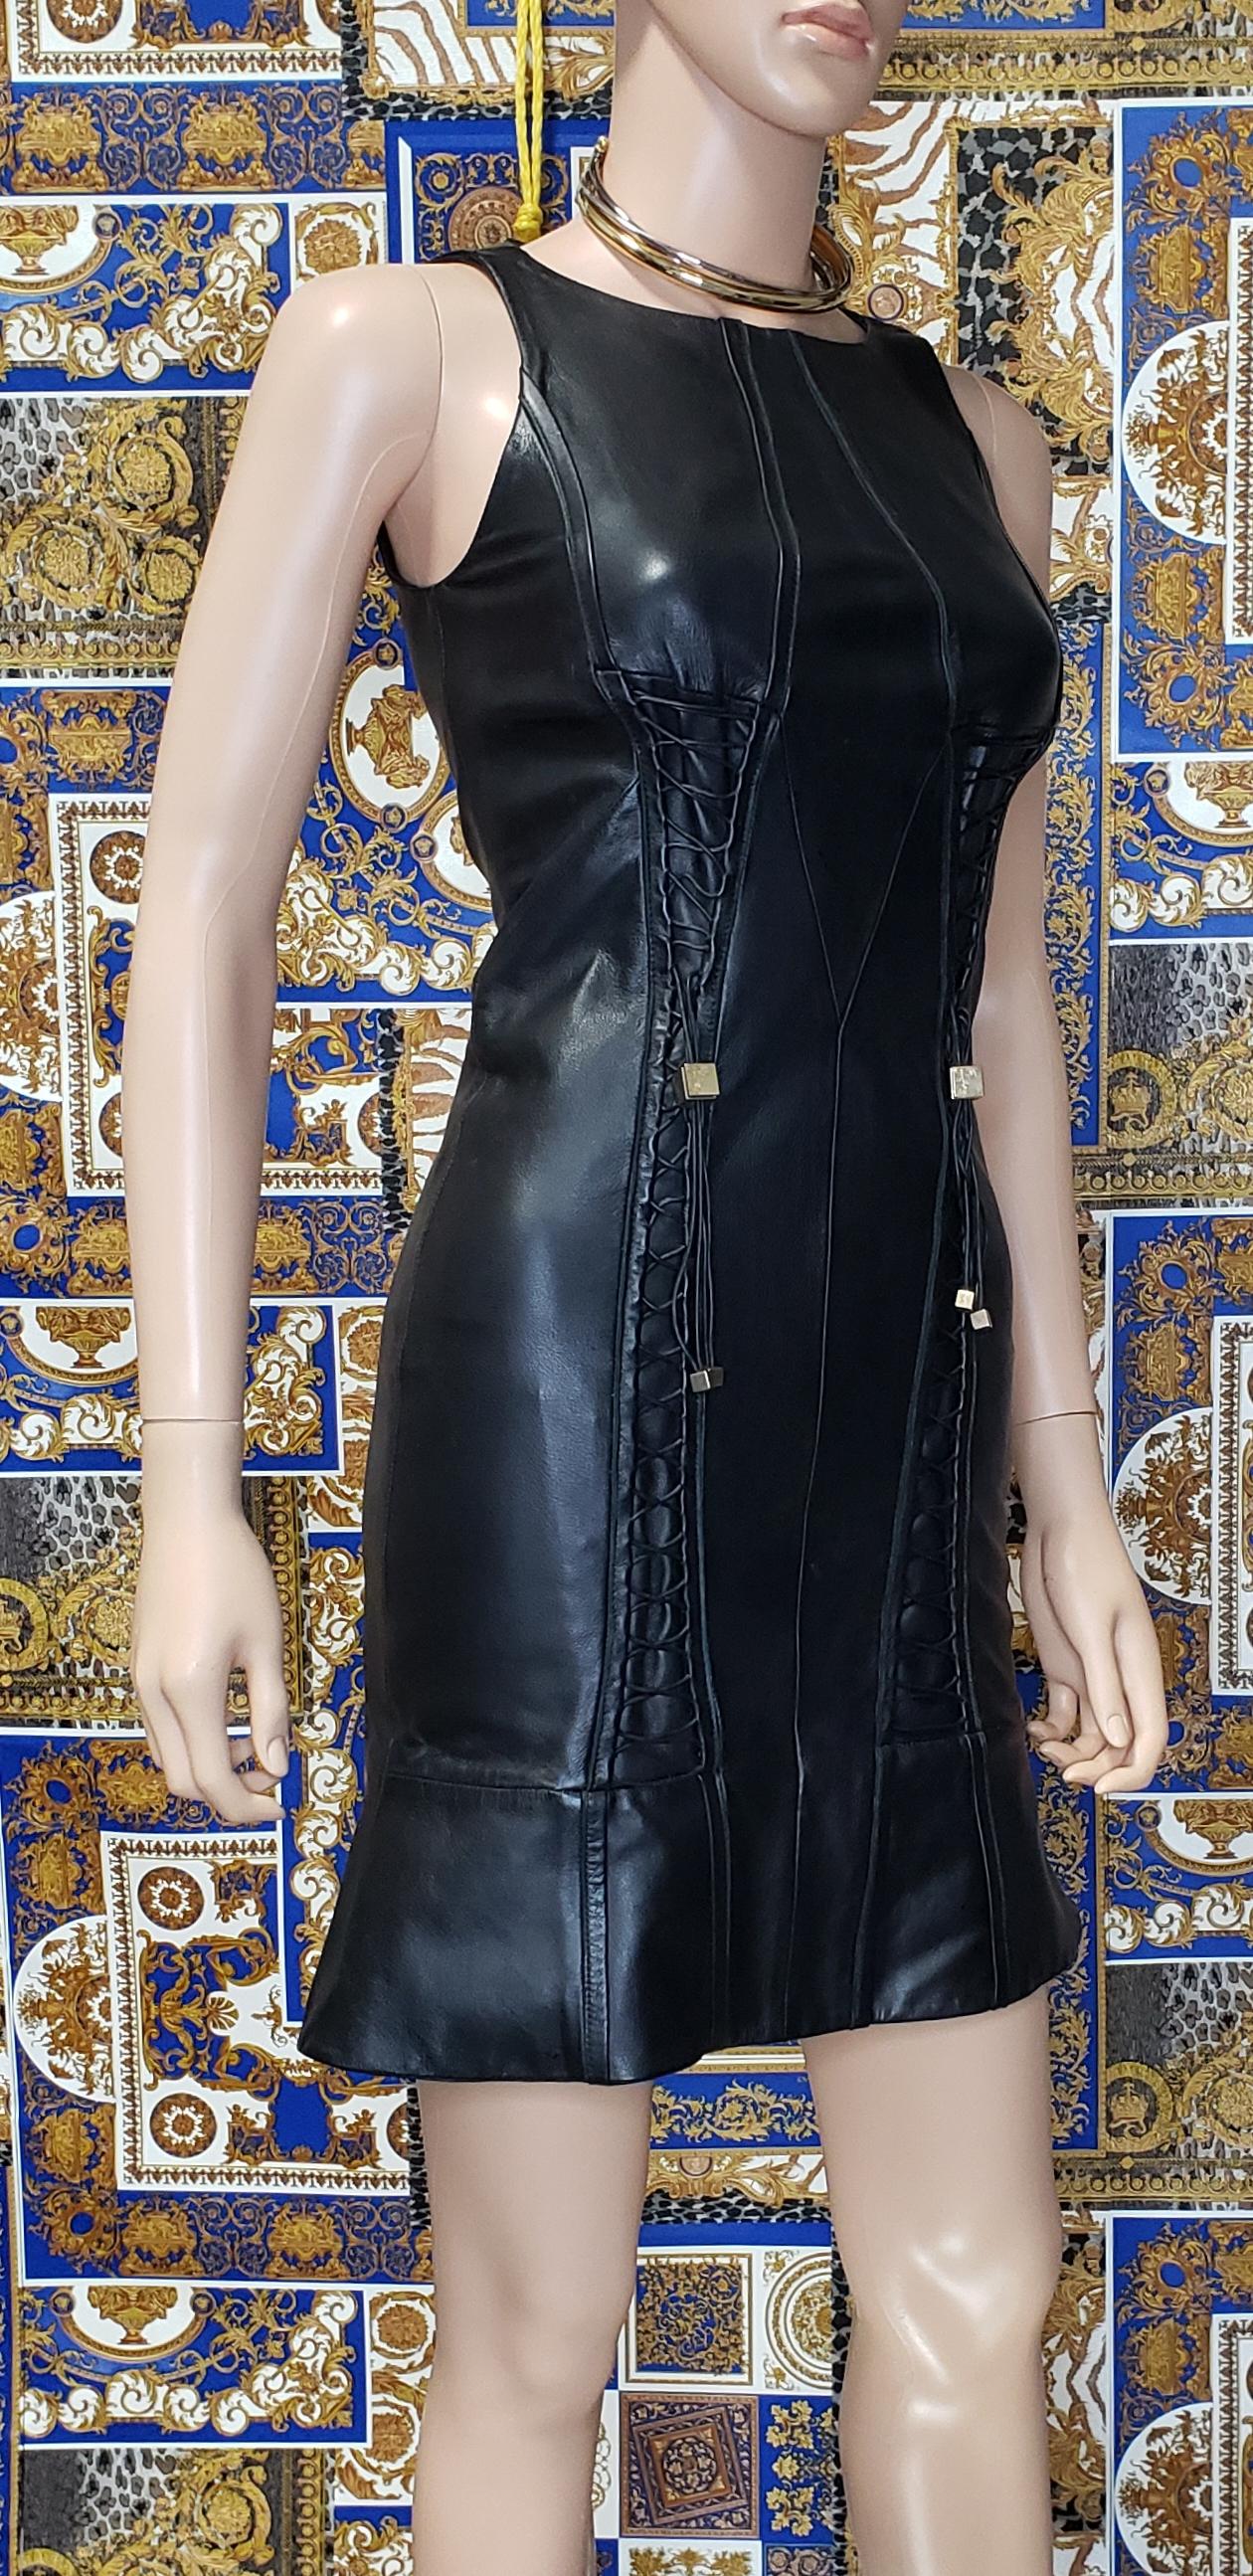 VERSACE BLACK LEATHER DRESS with TASSELS 38 - 4 For Sale 5